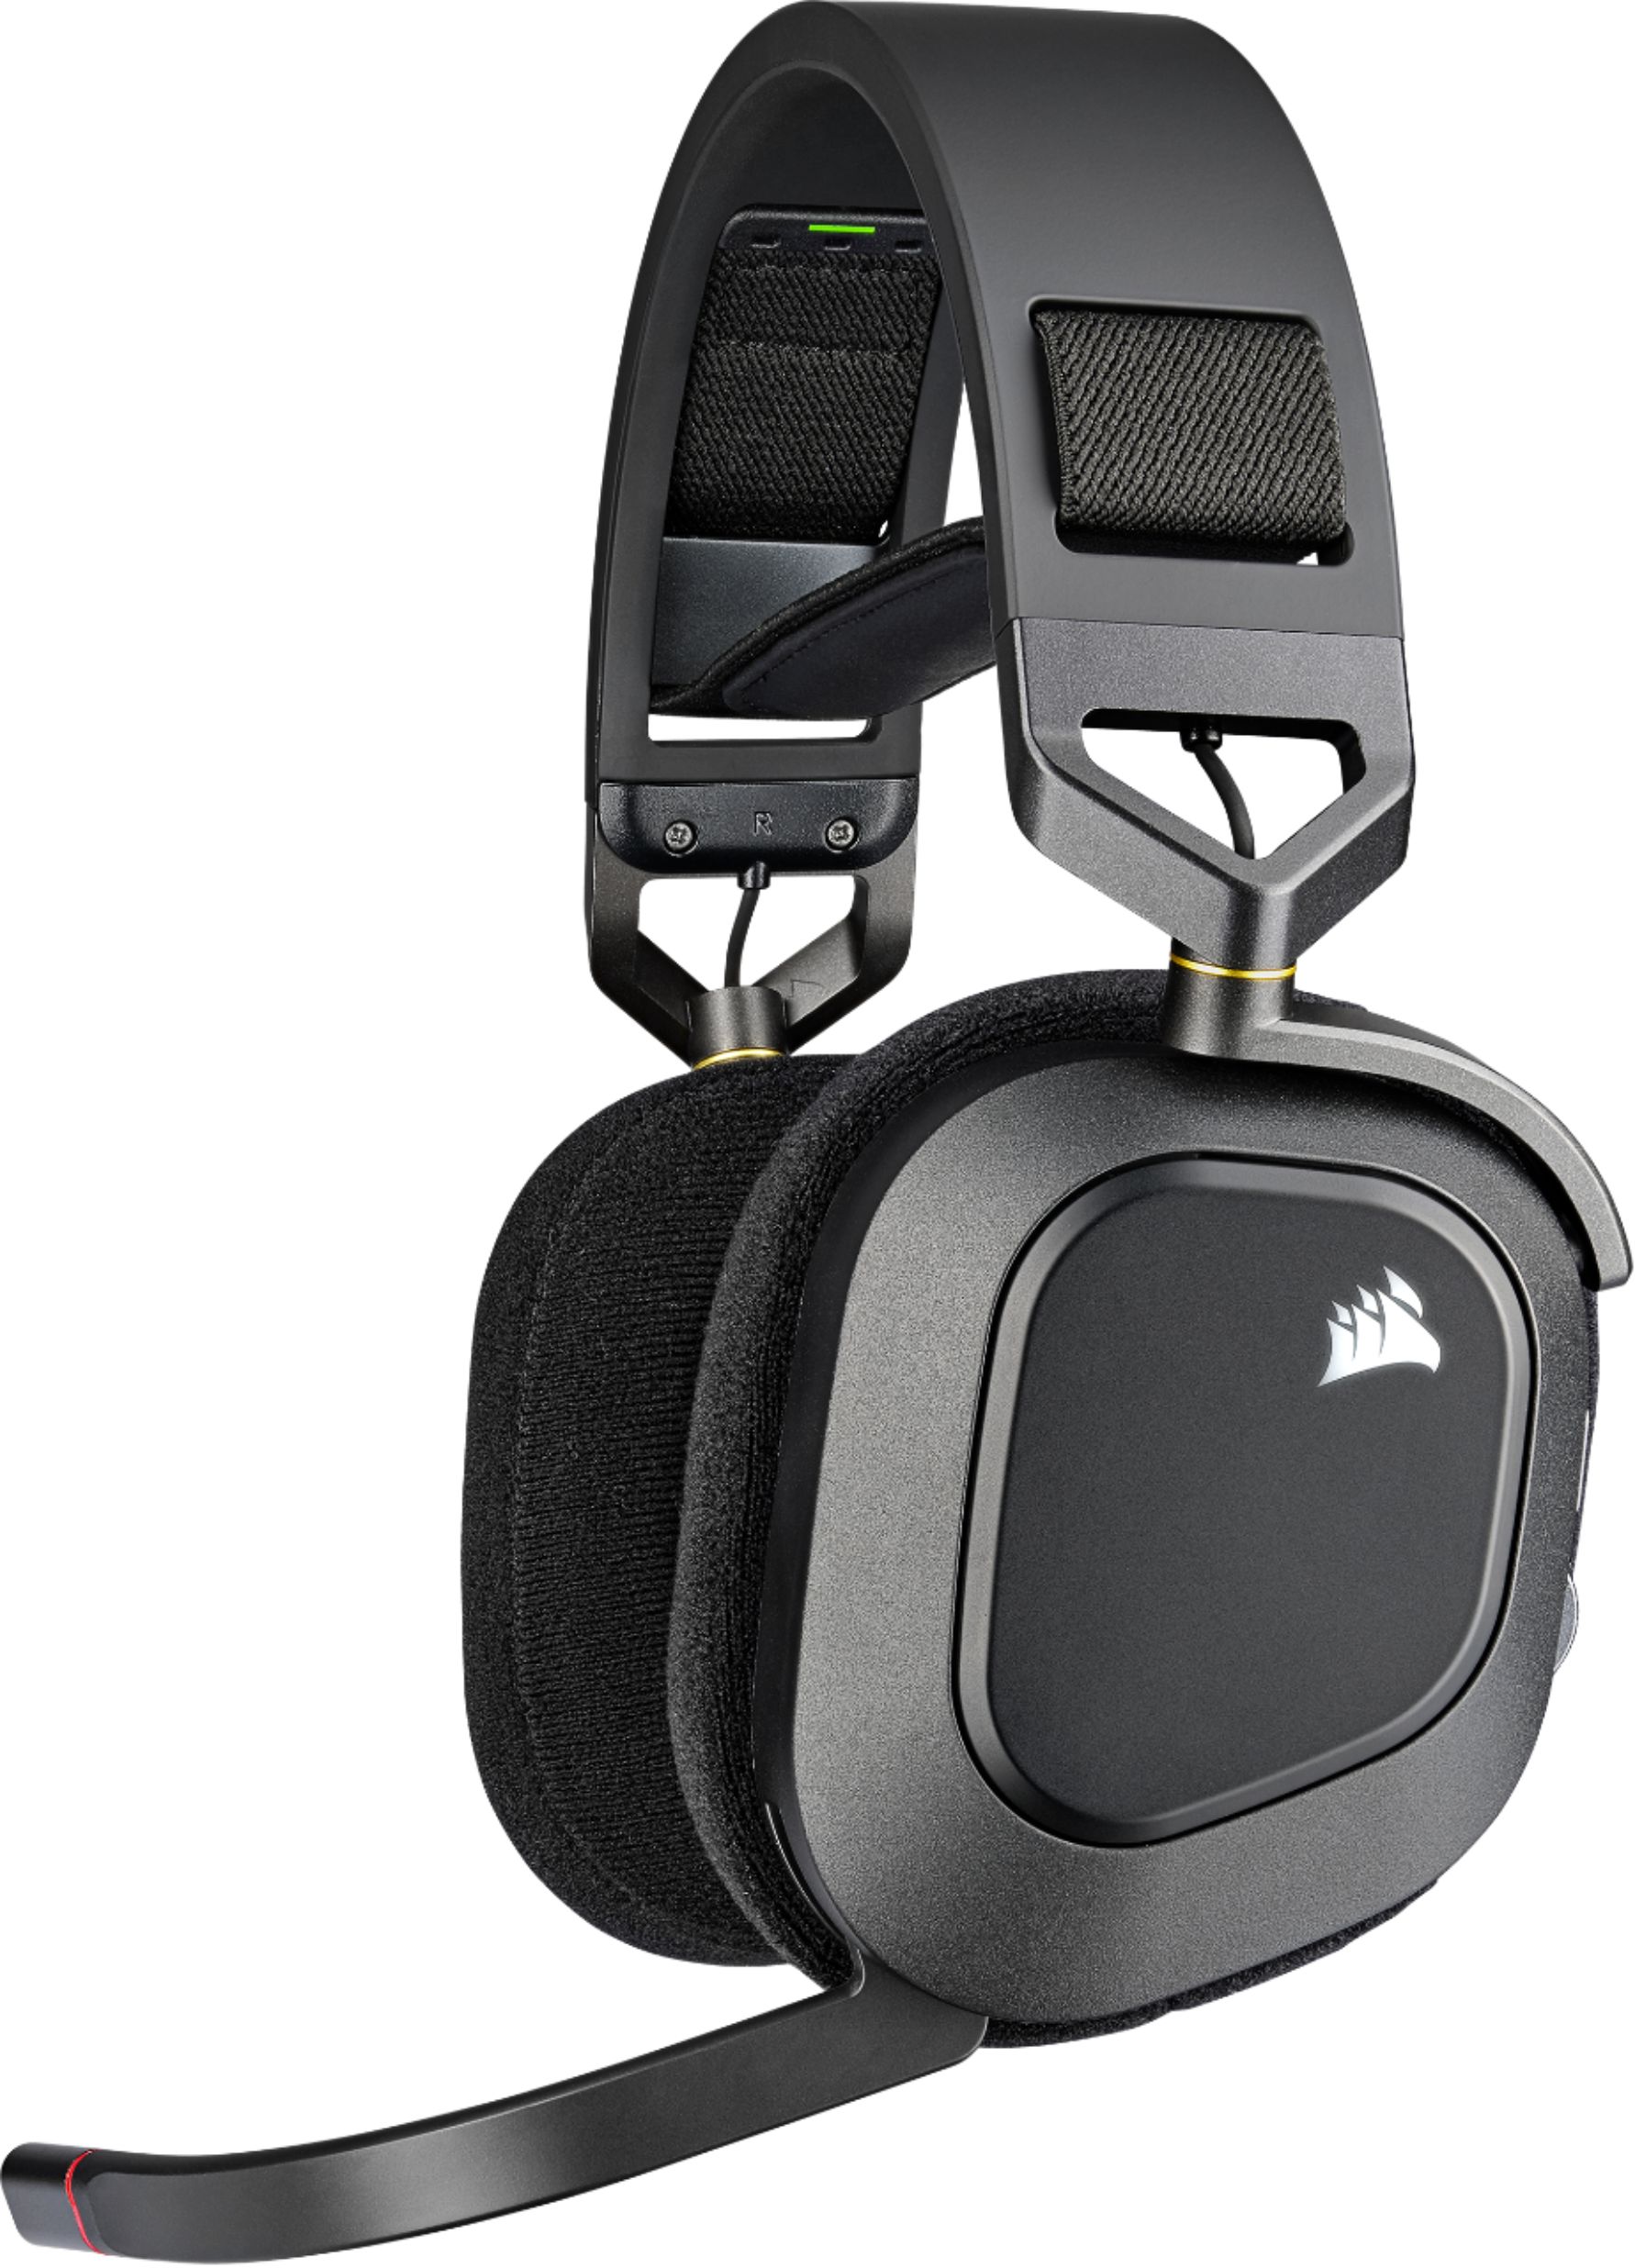 CORSAIR HS80 RGB WIRELESS Dolby Atmos Gaming Headset for PC, Mac